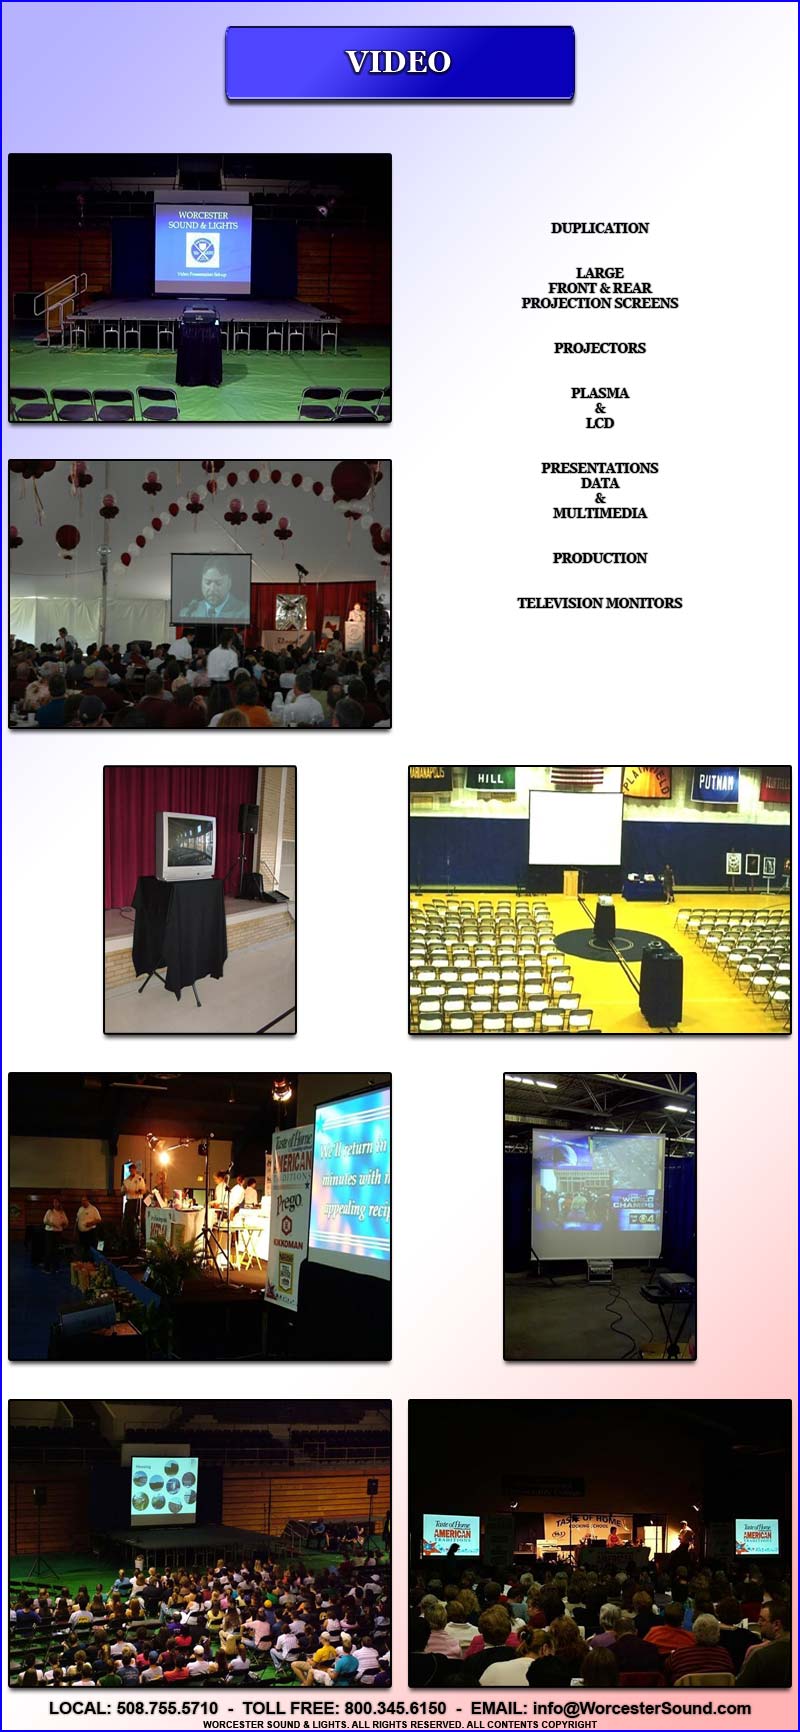 DUPLICATION


LARGE
FRONT & REAR
PROJECTION SCREENS


PROJECTORS


PLASMA
&
LCD


PRESENTATIONS
DATA
&
MULTIMEDIA


PRODUCTION


TELEVISION MONITORS

